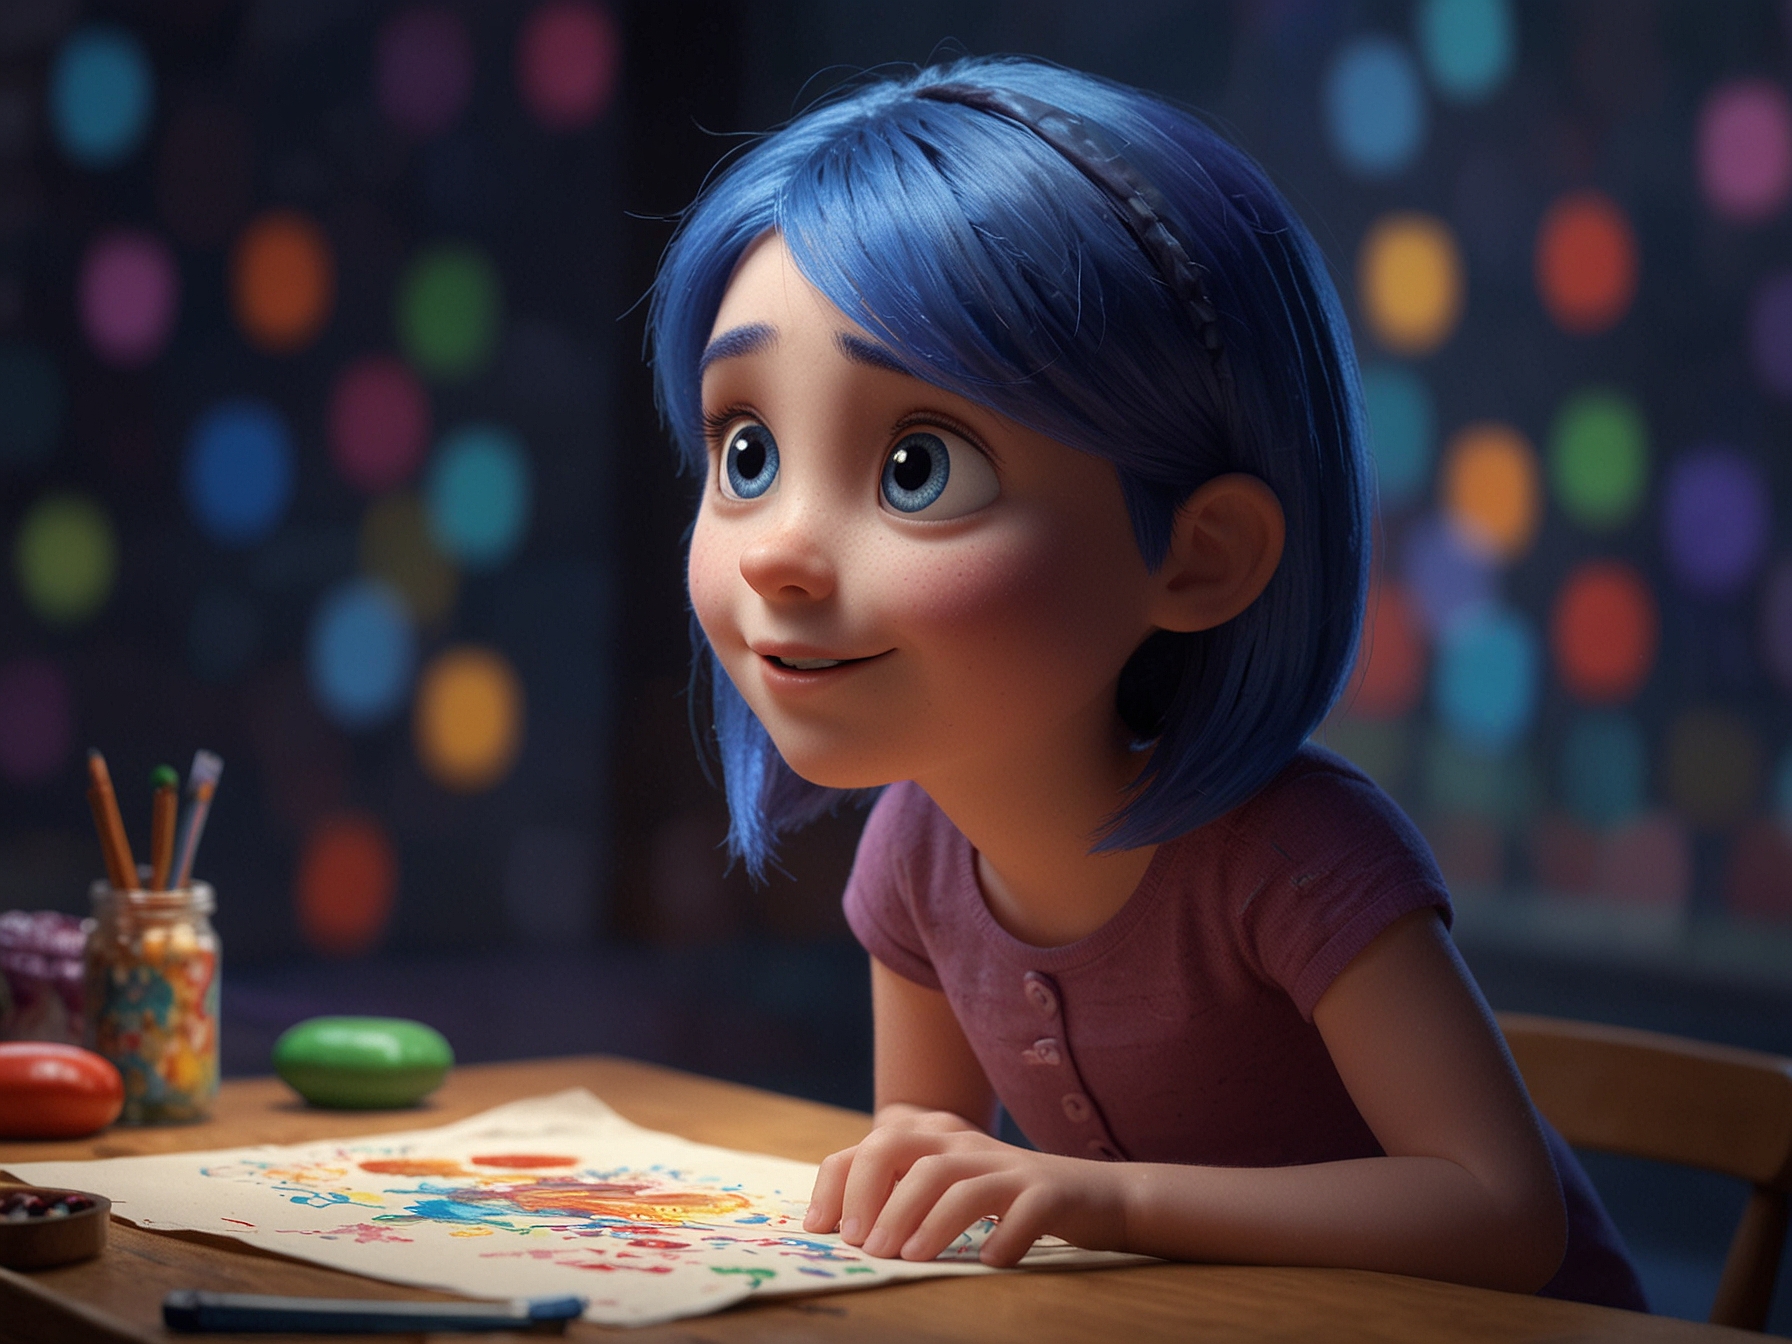 A vibrant scene from Inside Out 2 showcasing the main character, Riley, and her emotions—Joy, Sadness, Anger, Disgust, and Fear—capturing the movie's whimsical and heartfelt storytelling.